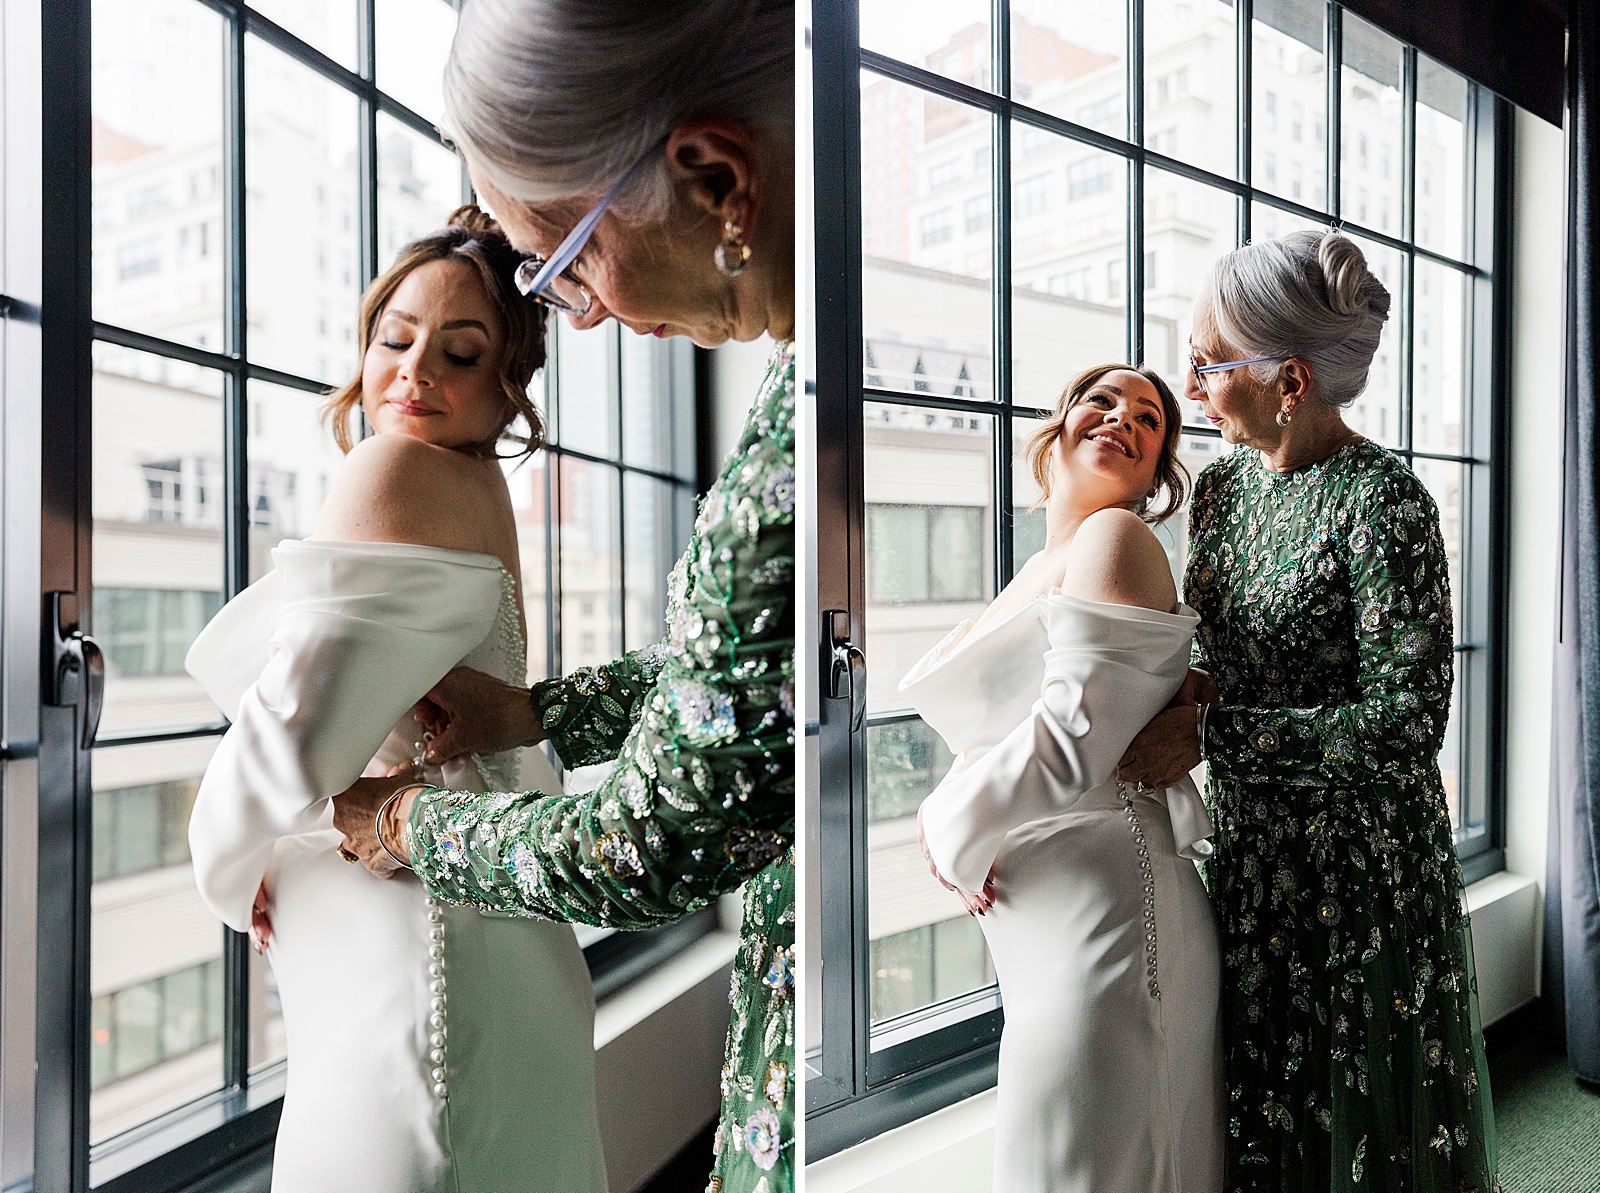 Left photo: Close up shot of the bride's mother buttoning up the bride's dress.
Right photo: Shot of the bride and her mother smiling at each other as the bride's mother does up the bride's wedding dress. 